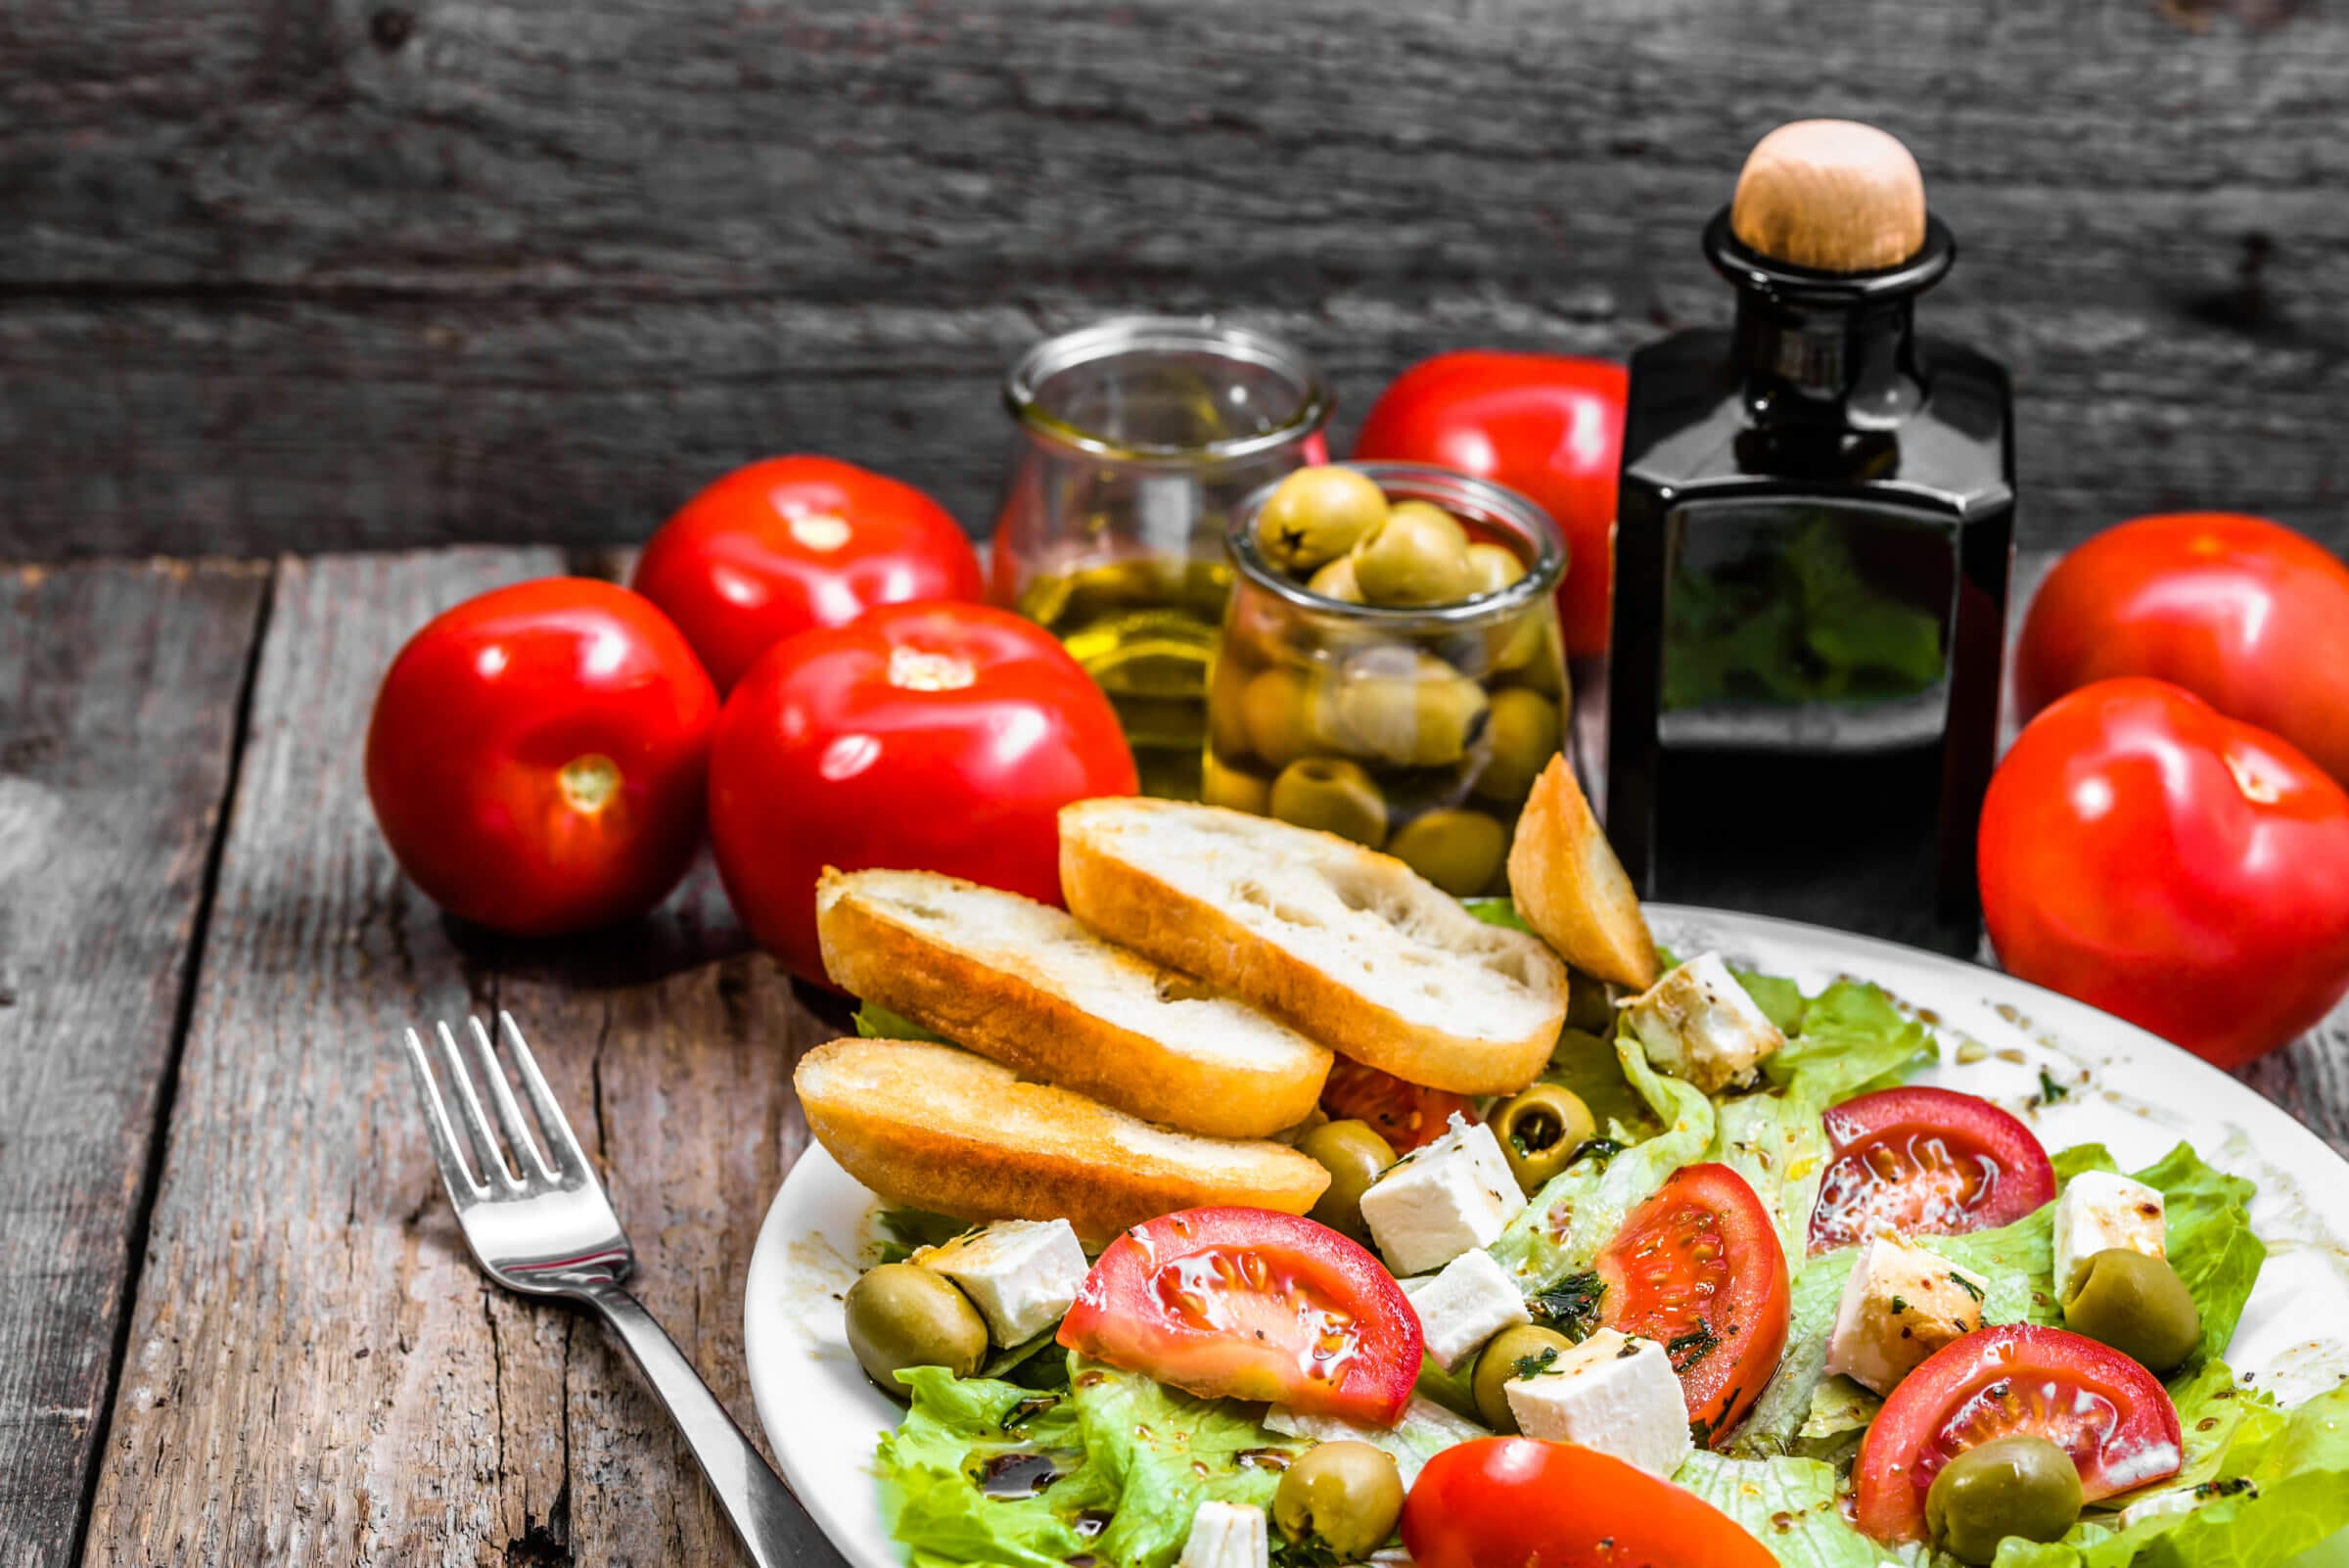 A Mediterranean diet isn’t terrible for someone who is metabolically healthy but I’d avoid it if you’re not.